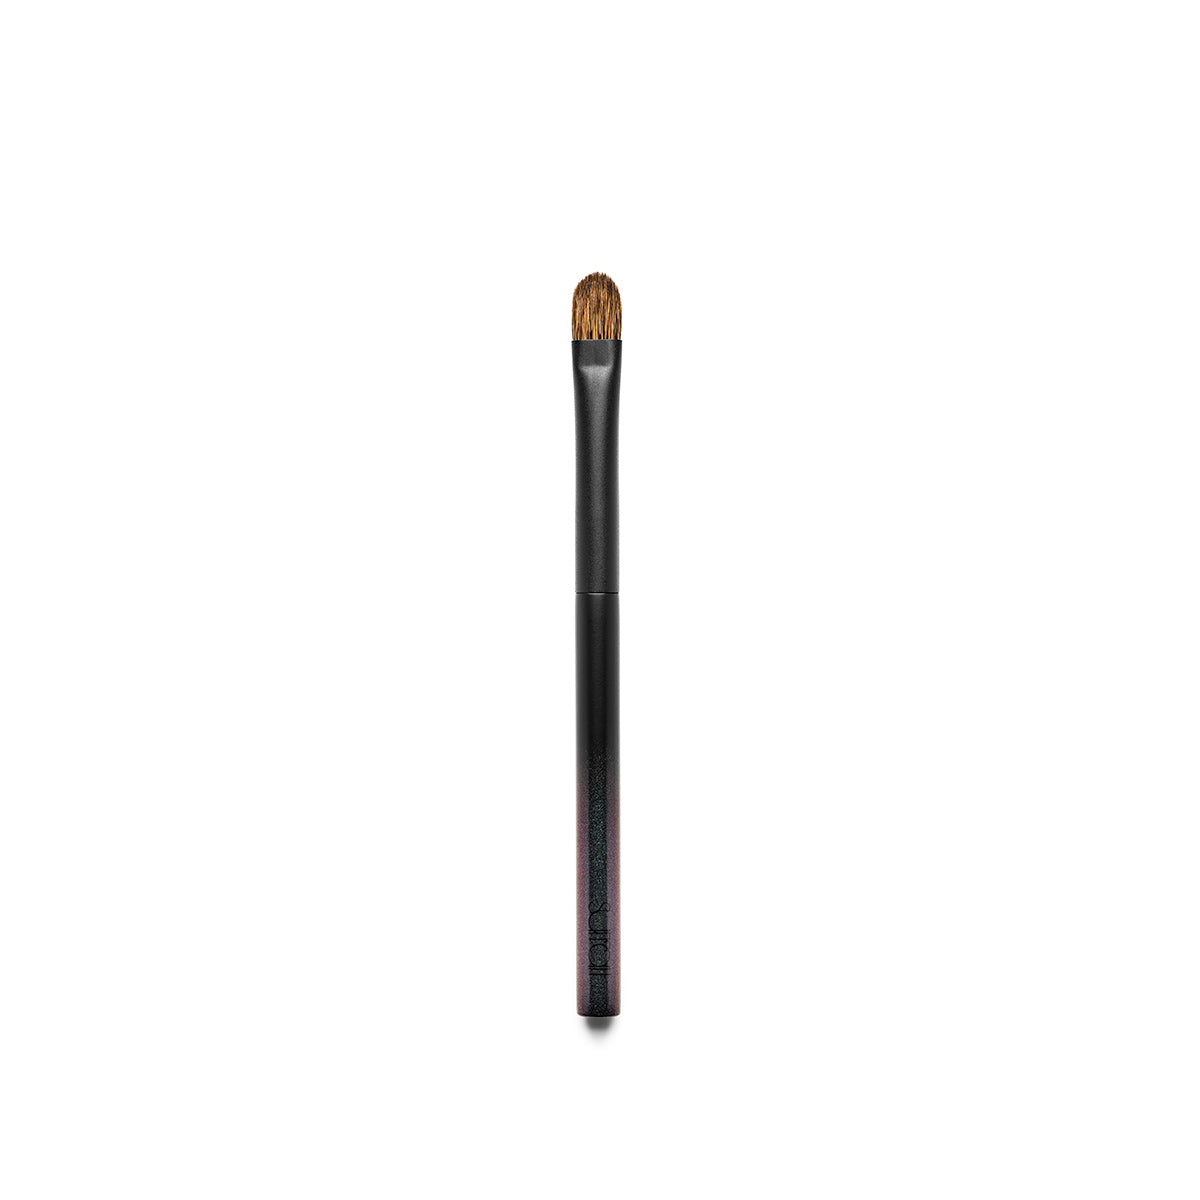 Artistique Eye and Face Brush Duo - ultra-soft natural hair makeup brush for eyeshadow in size medium